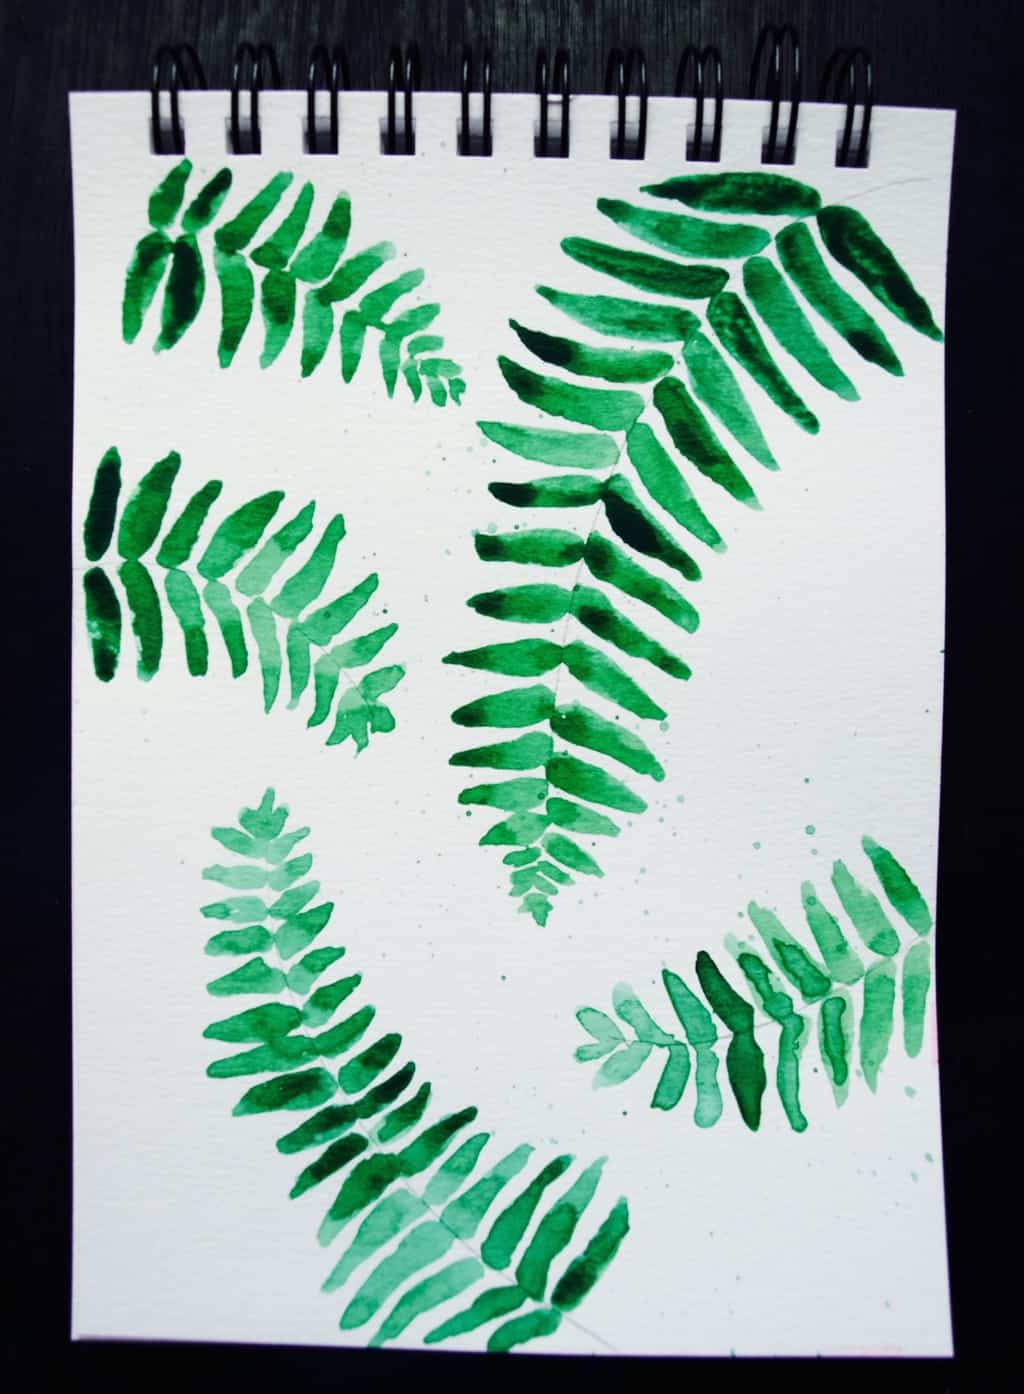 Watercolour challenge: inspired by jungle